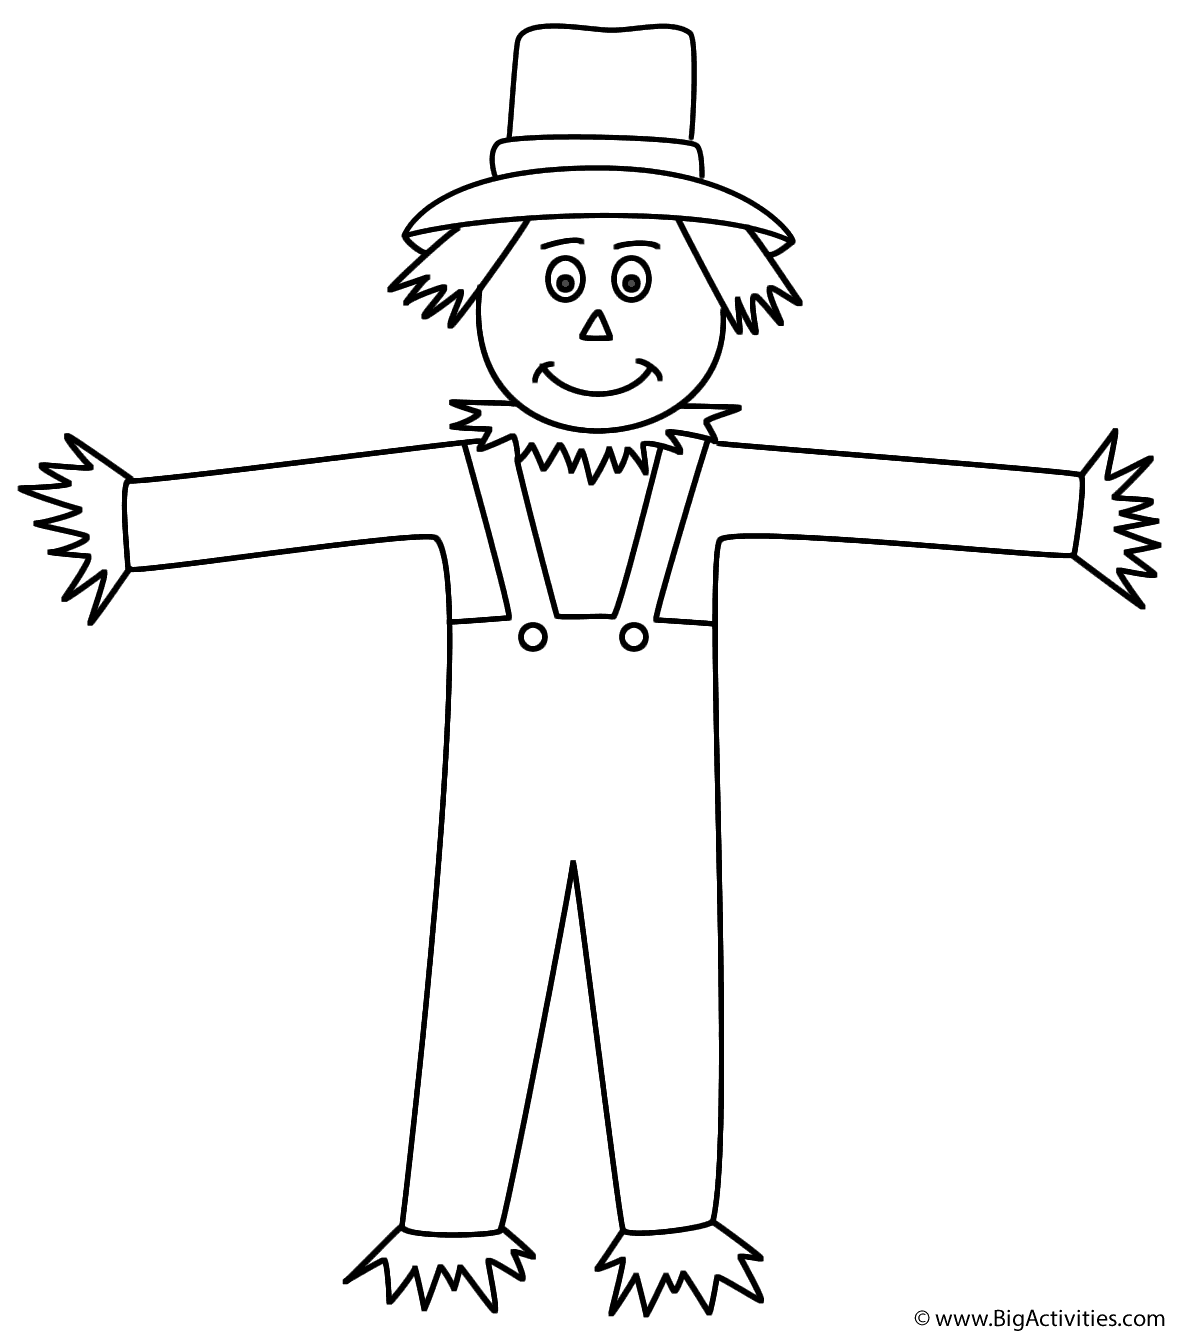 Outline Scarecrow Template